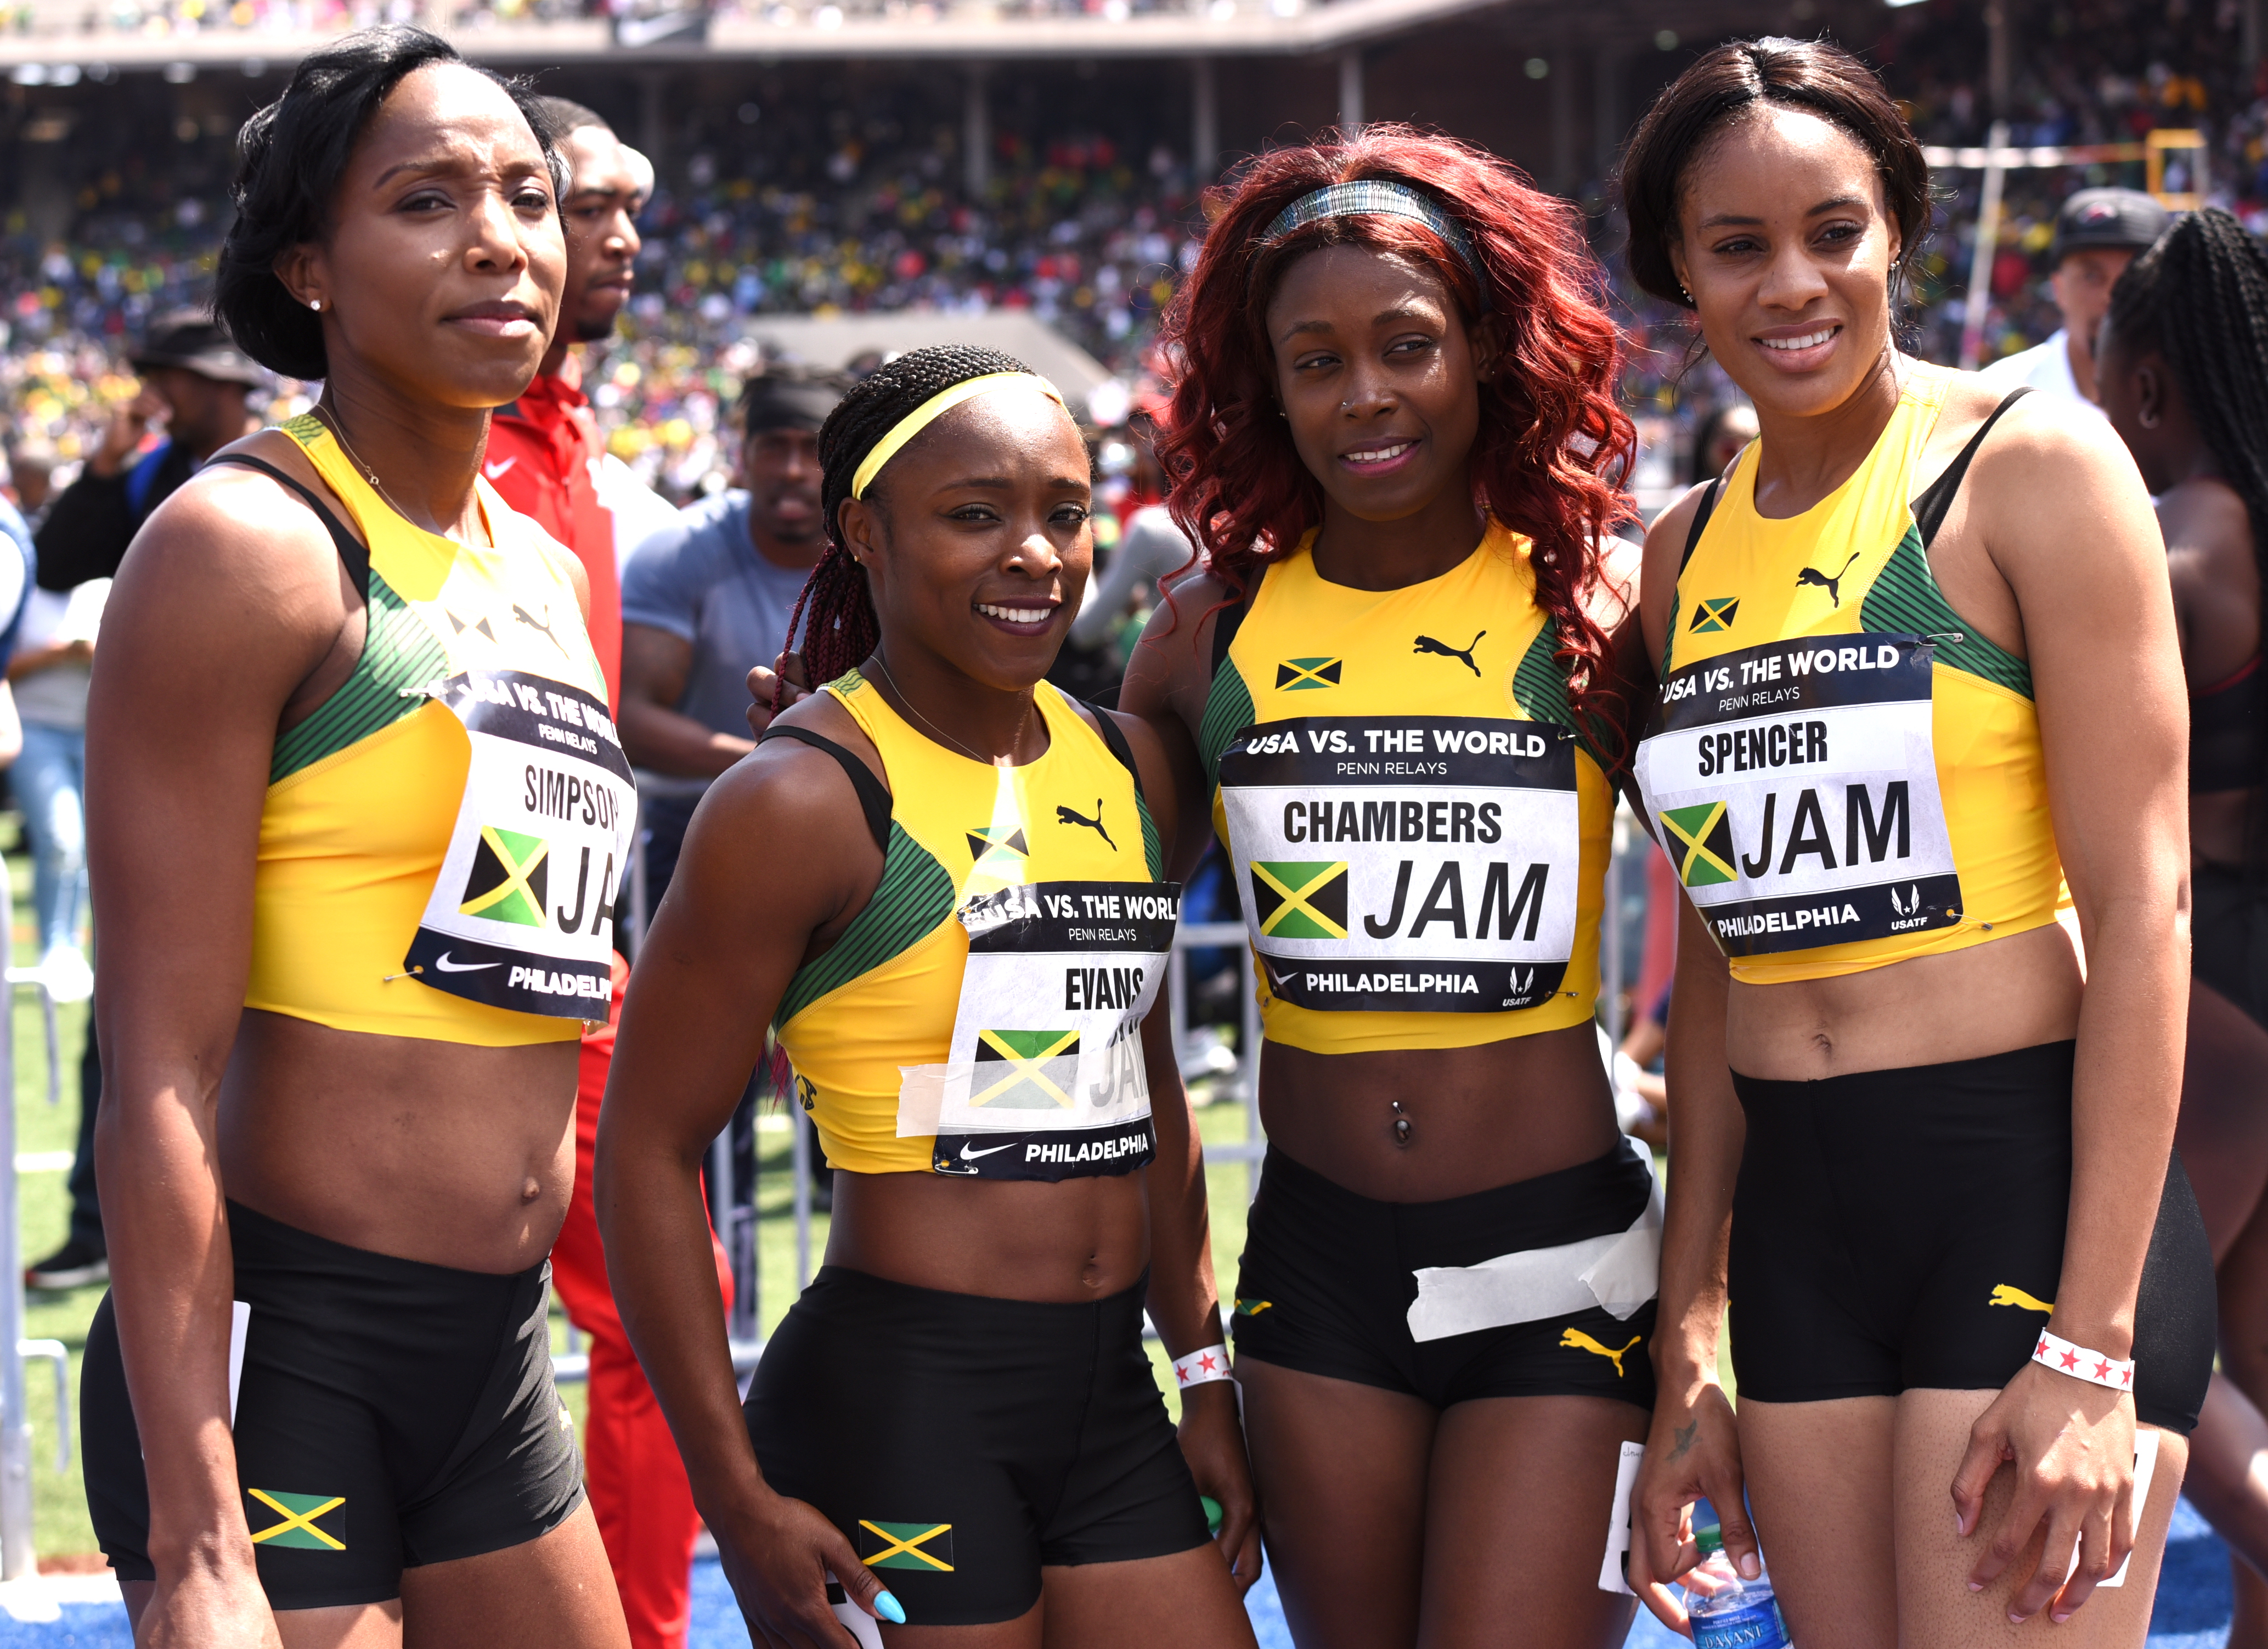 Jamaica outclassed by USA in 4×4 and SMR at Penn Relays 2018